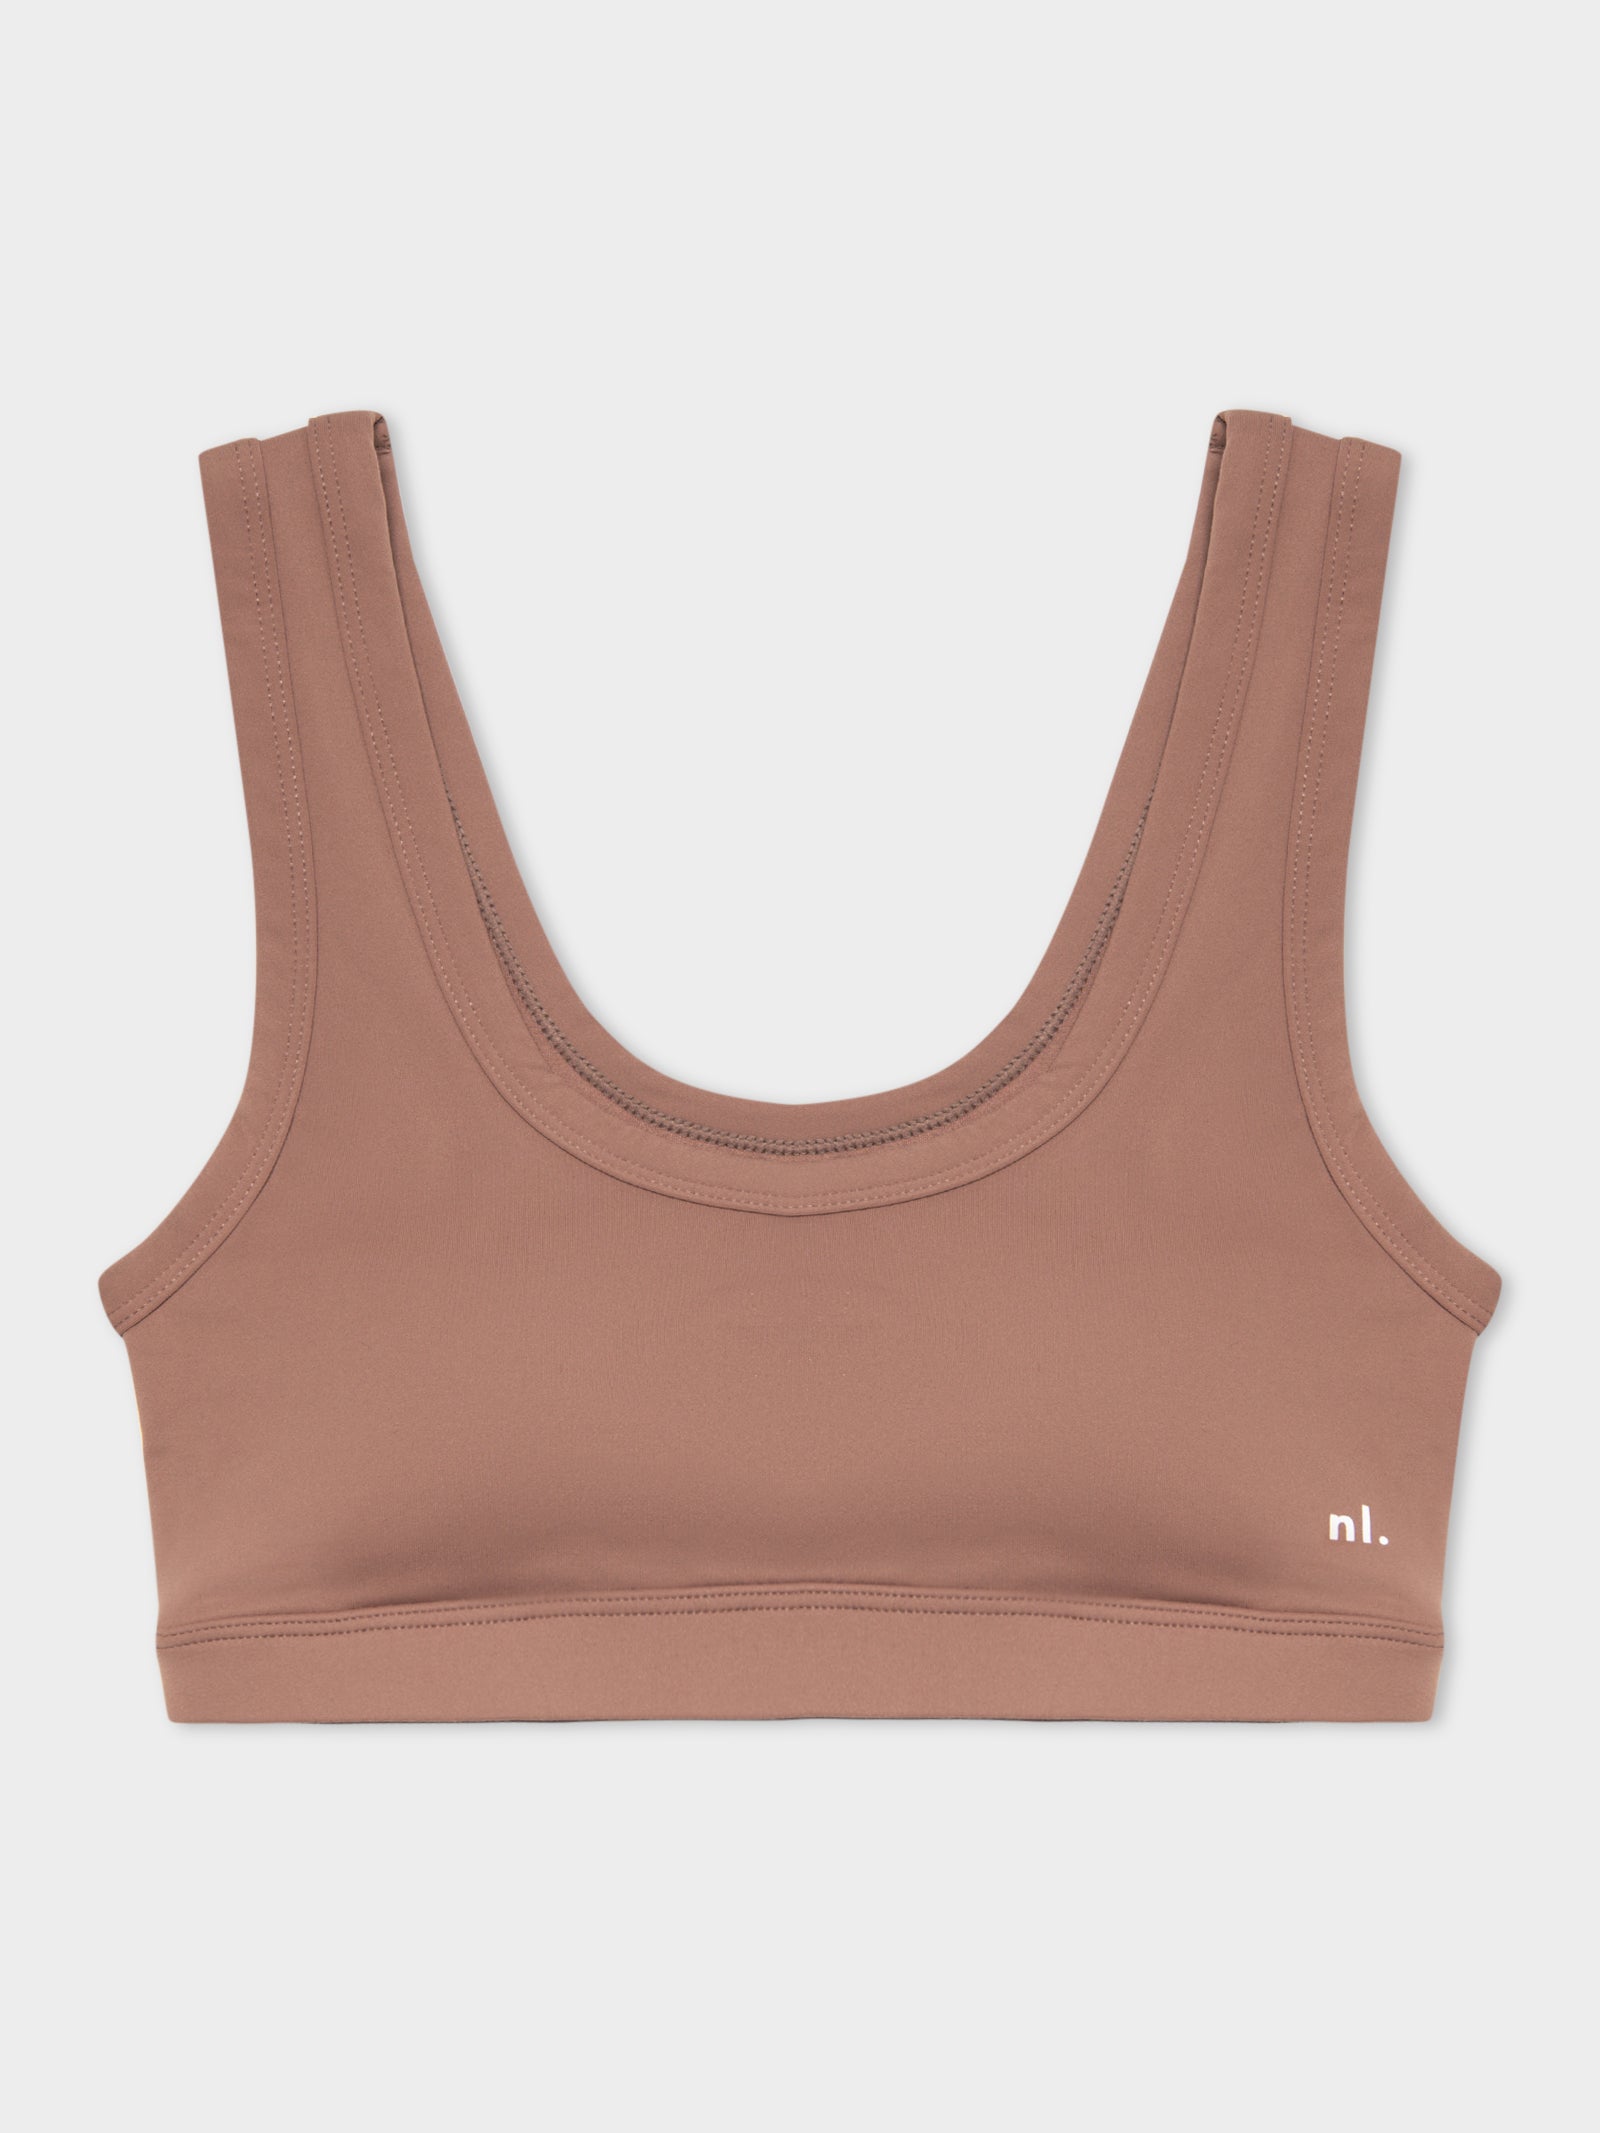 Nude Active Sports Bra in Rosewood